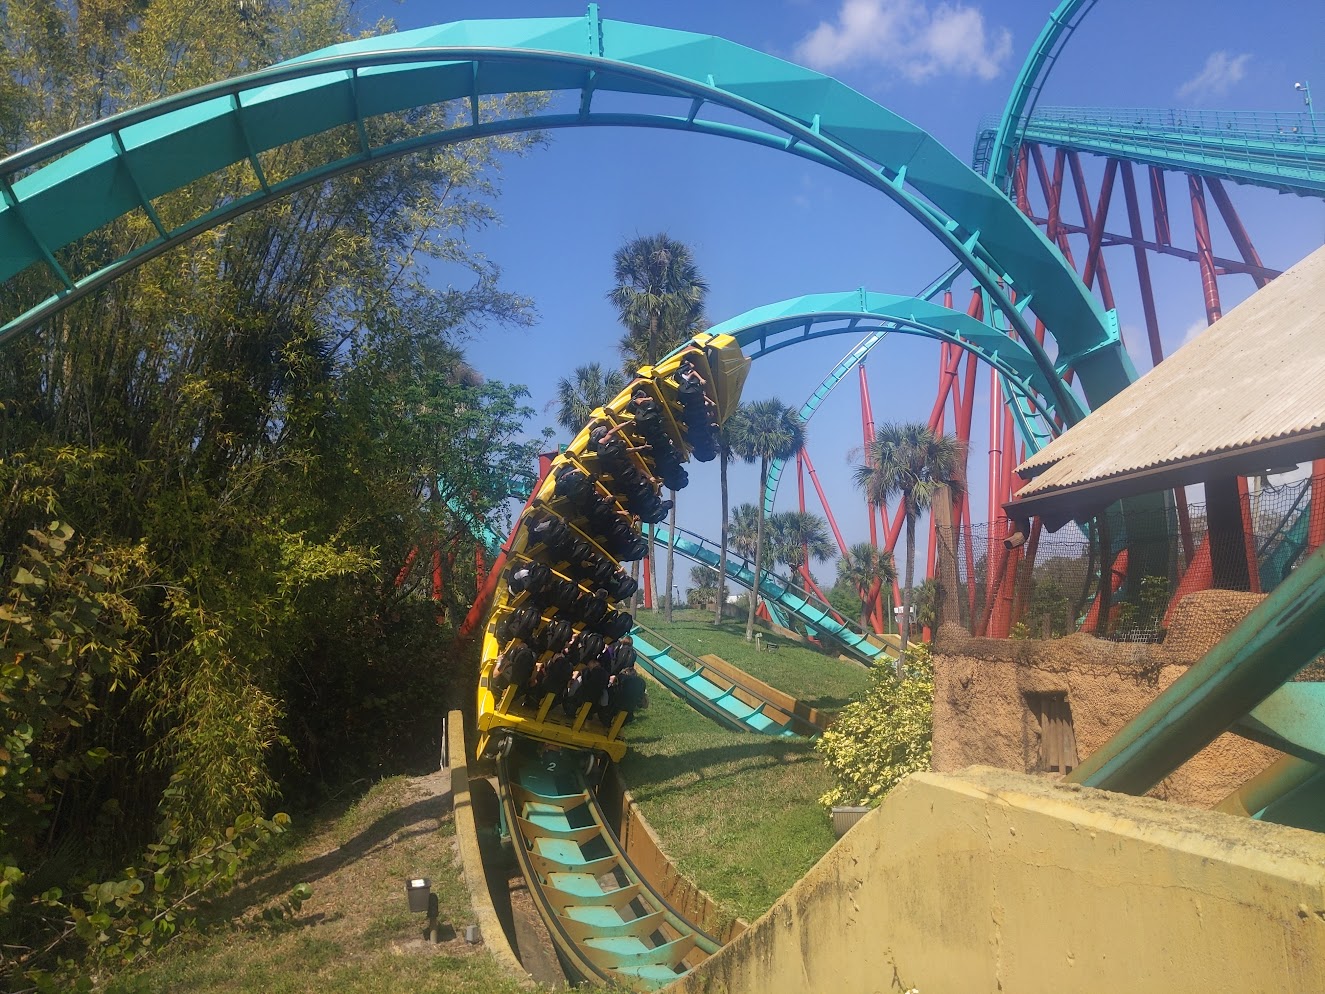 Kumba's corkscrew the yellow train is at the halfway point through it